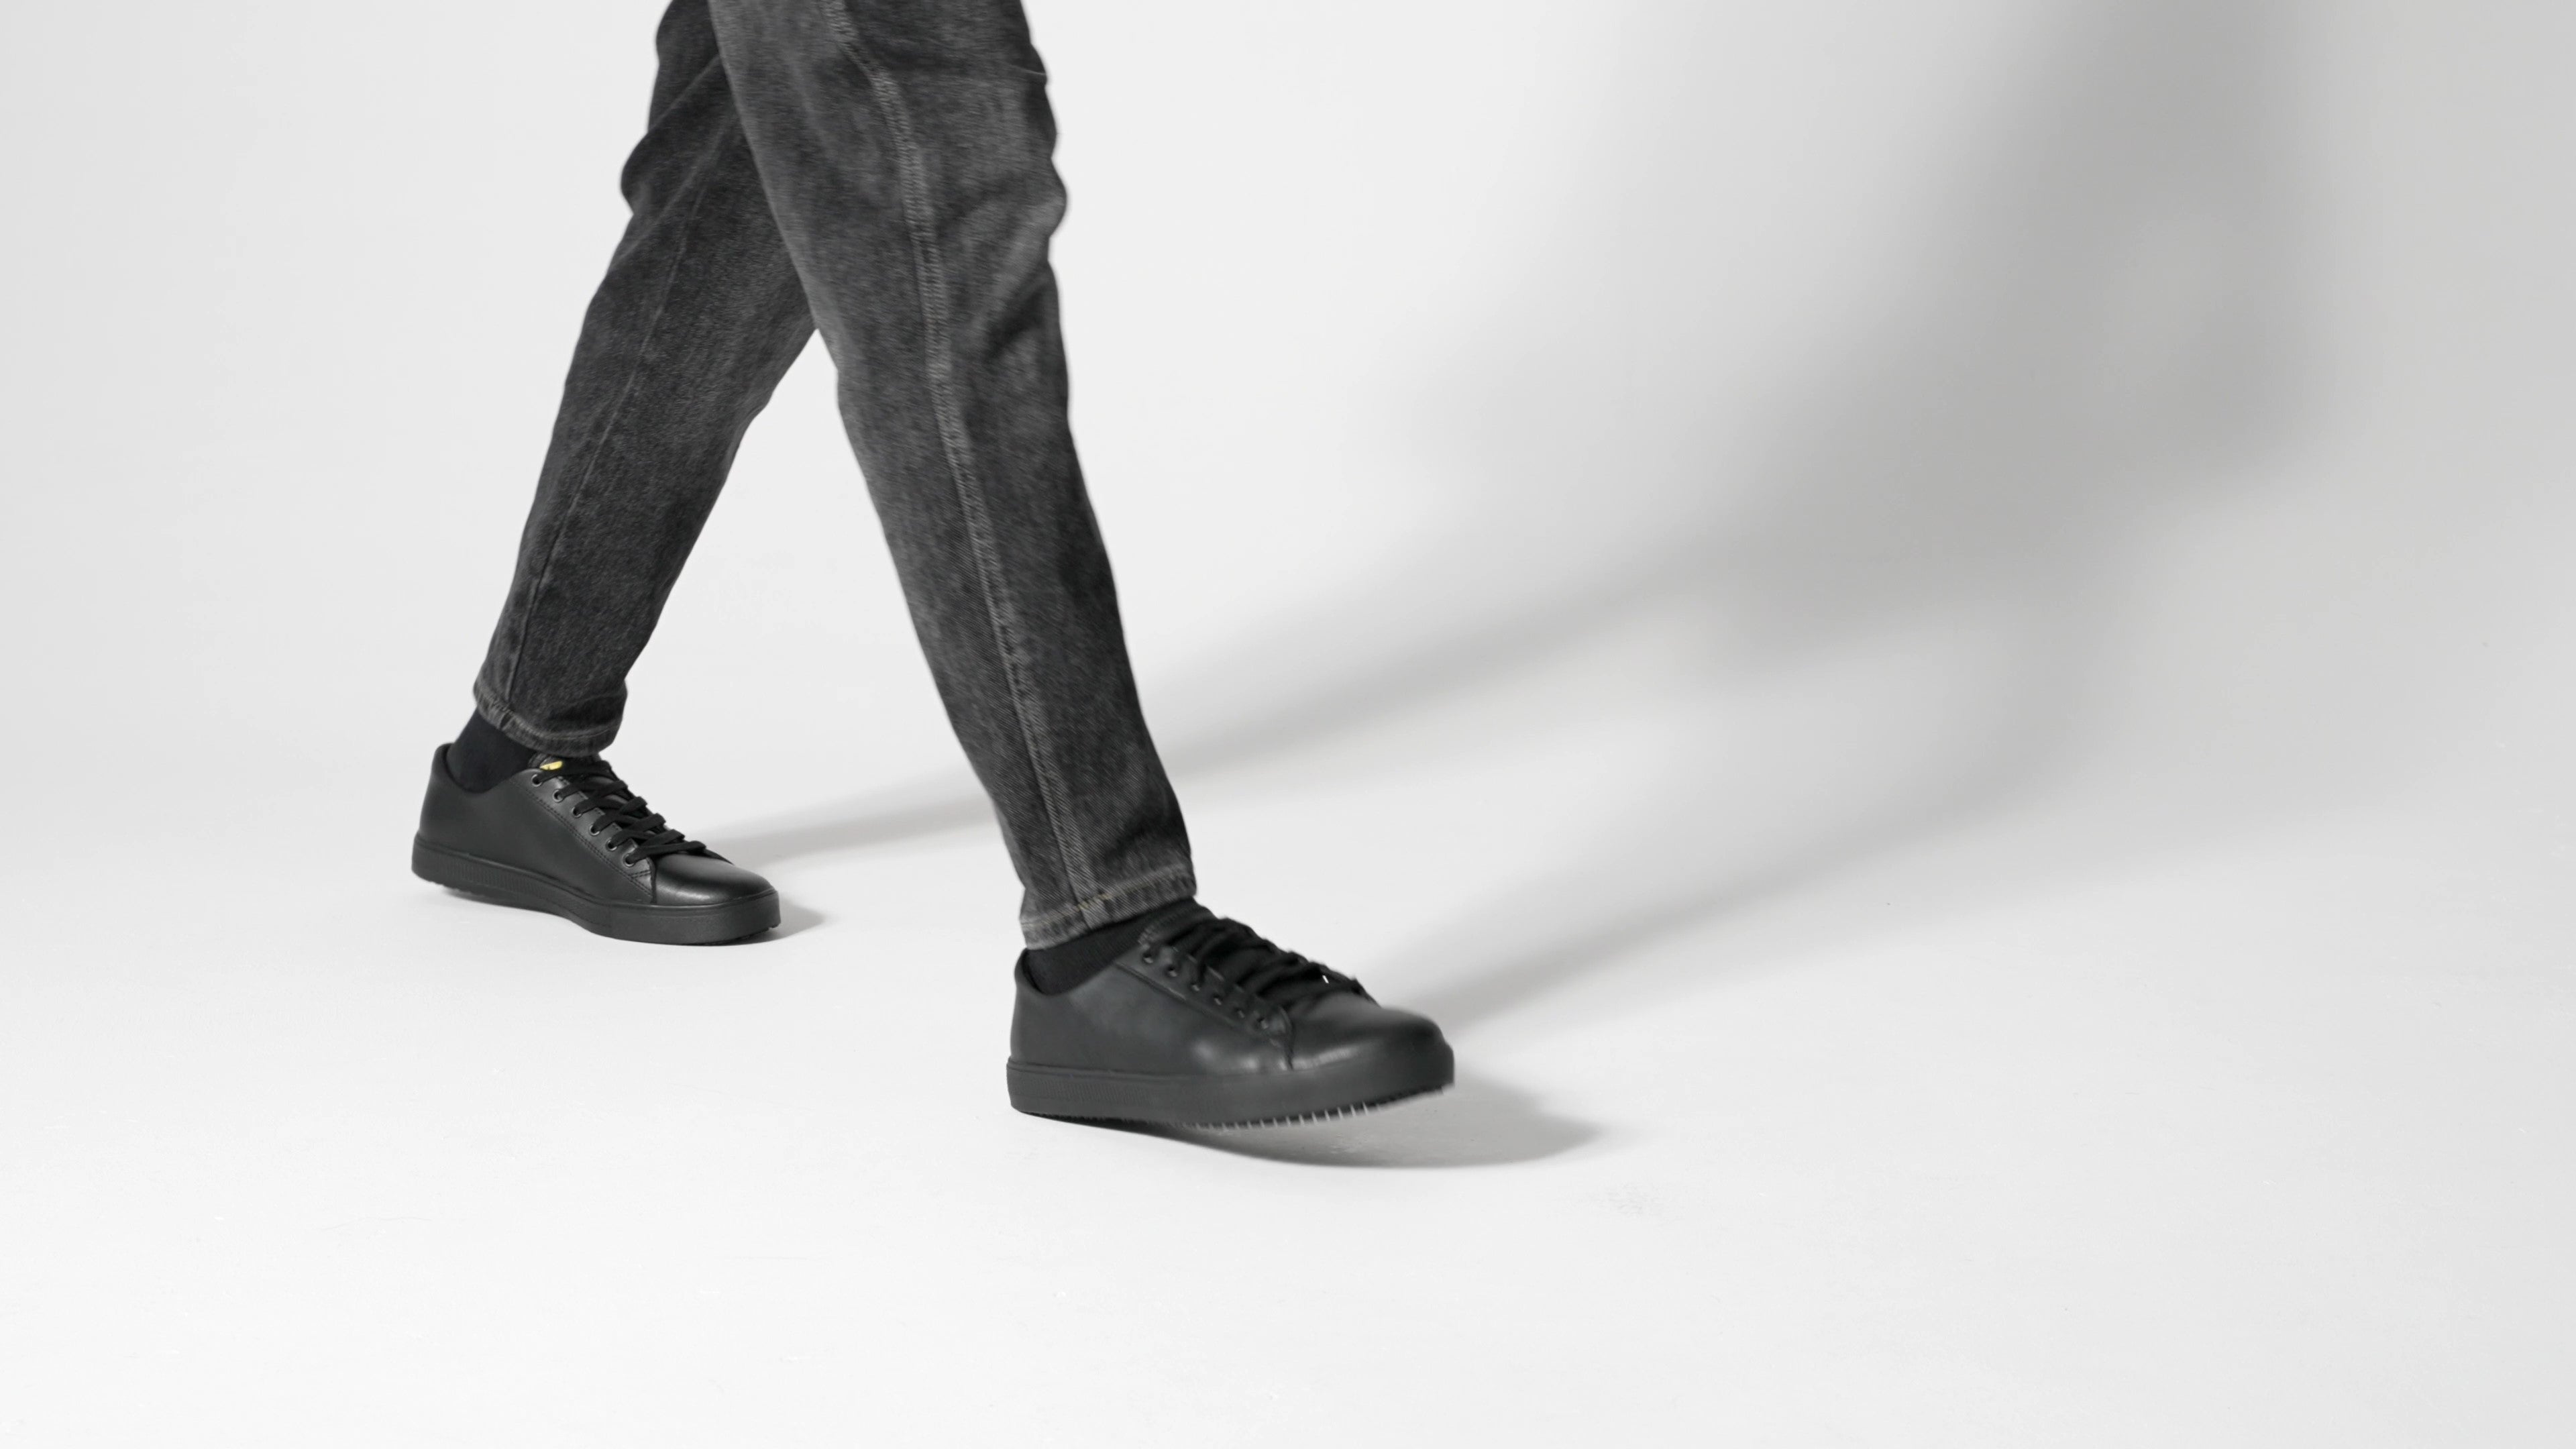 The Old School Low-Rider Black Gladiator Outsole from Shoes For Crews is a slip resistant lace-up shoe designed to provide confort throughout the day, product video.